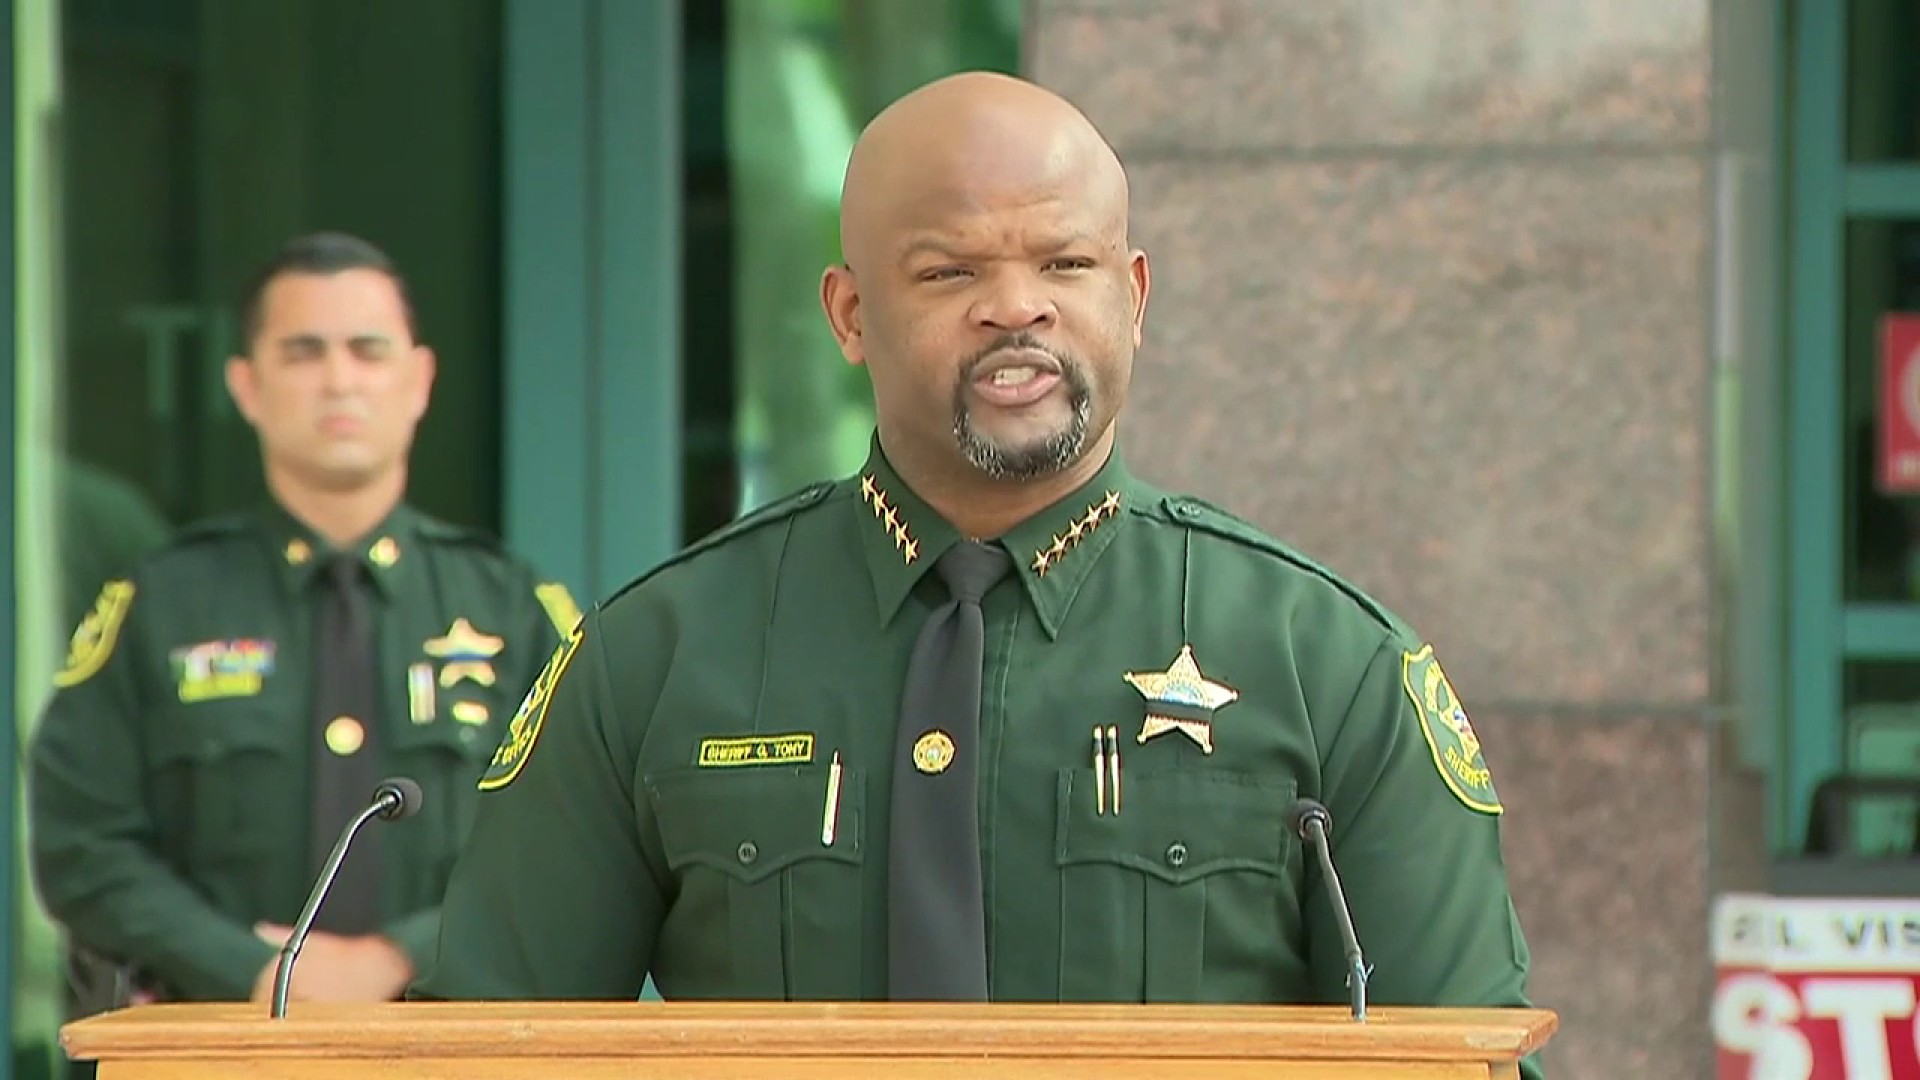 Investigators: Broward sheriff lied about past; no criminal charges